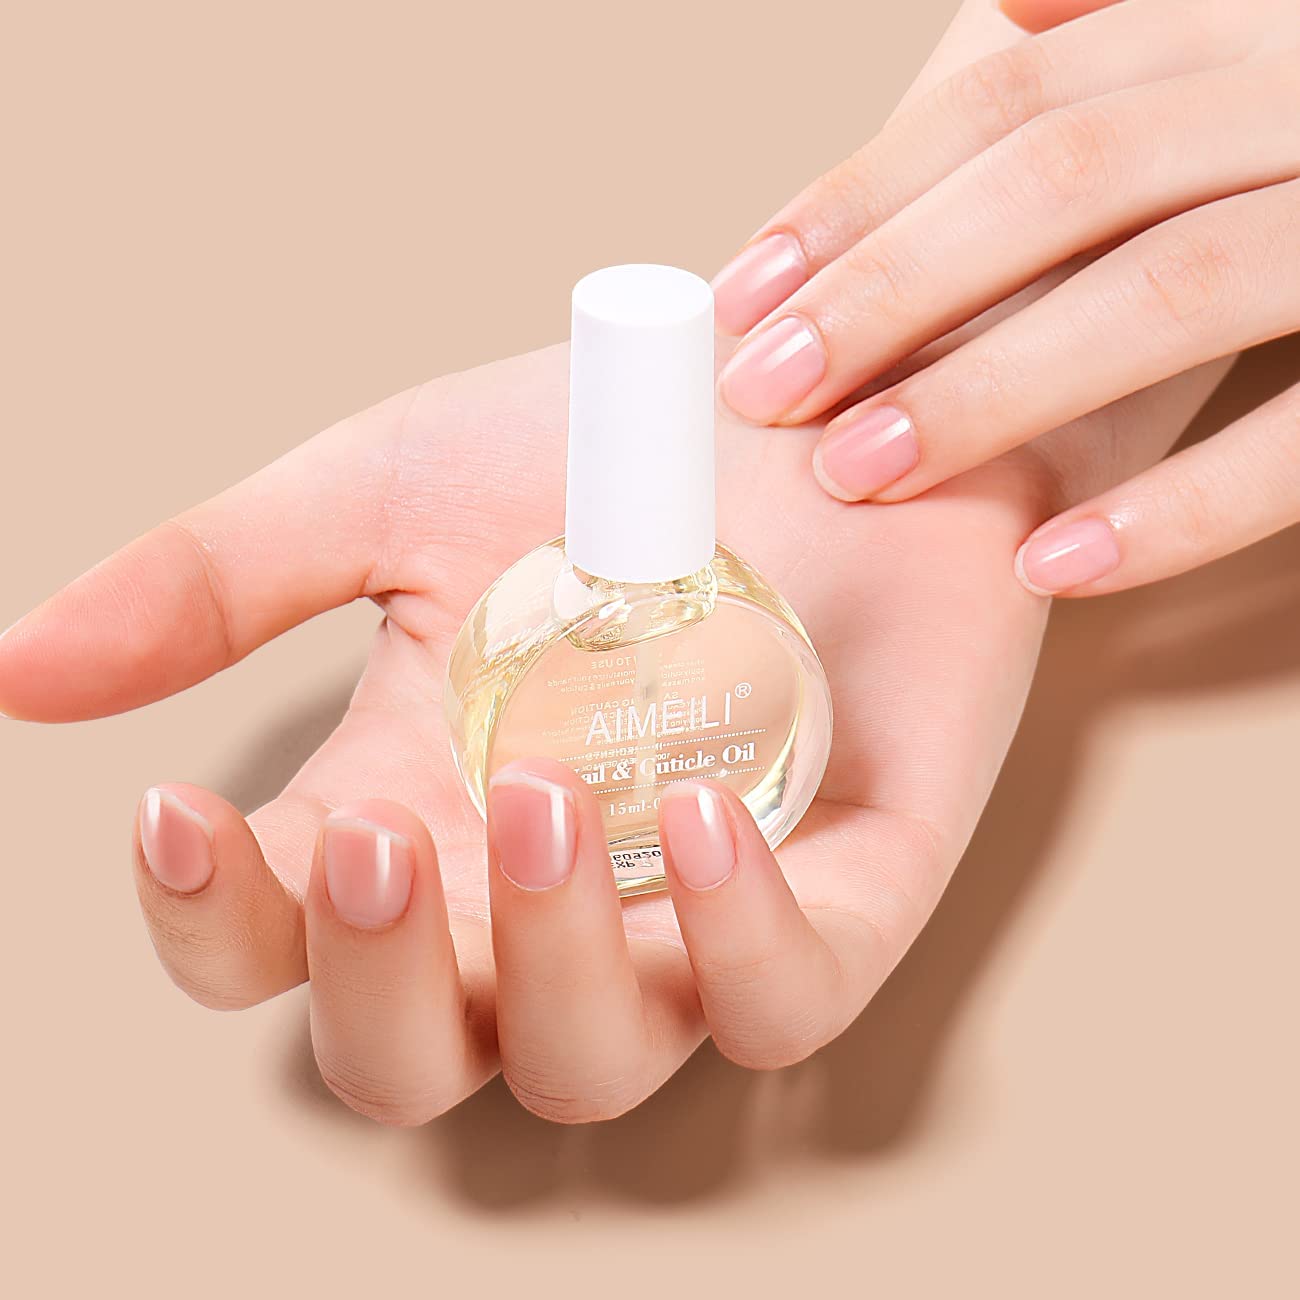 how to use cuticle oil